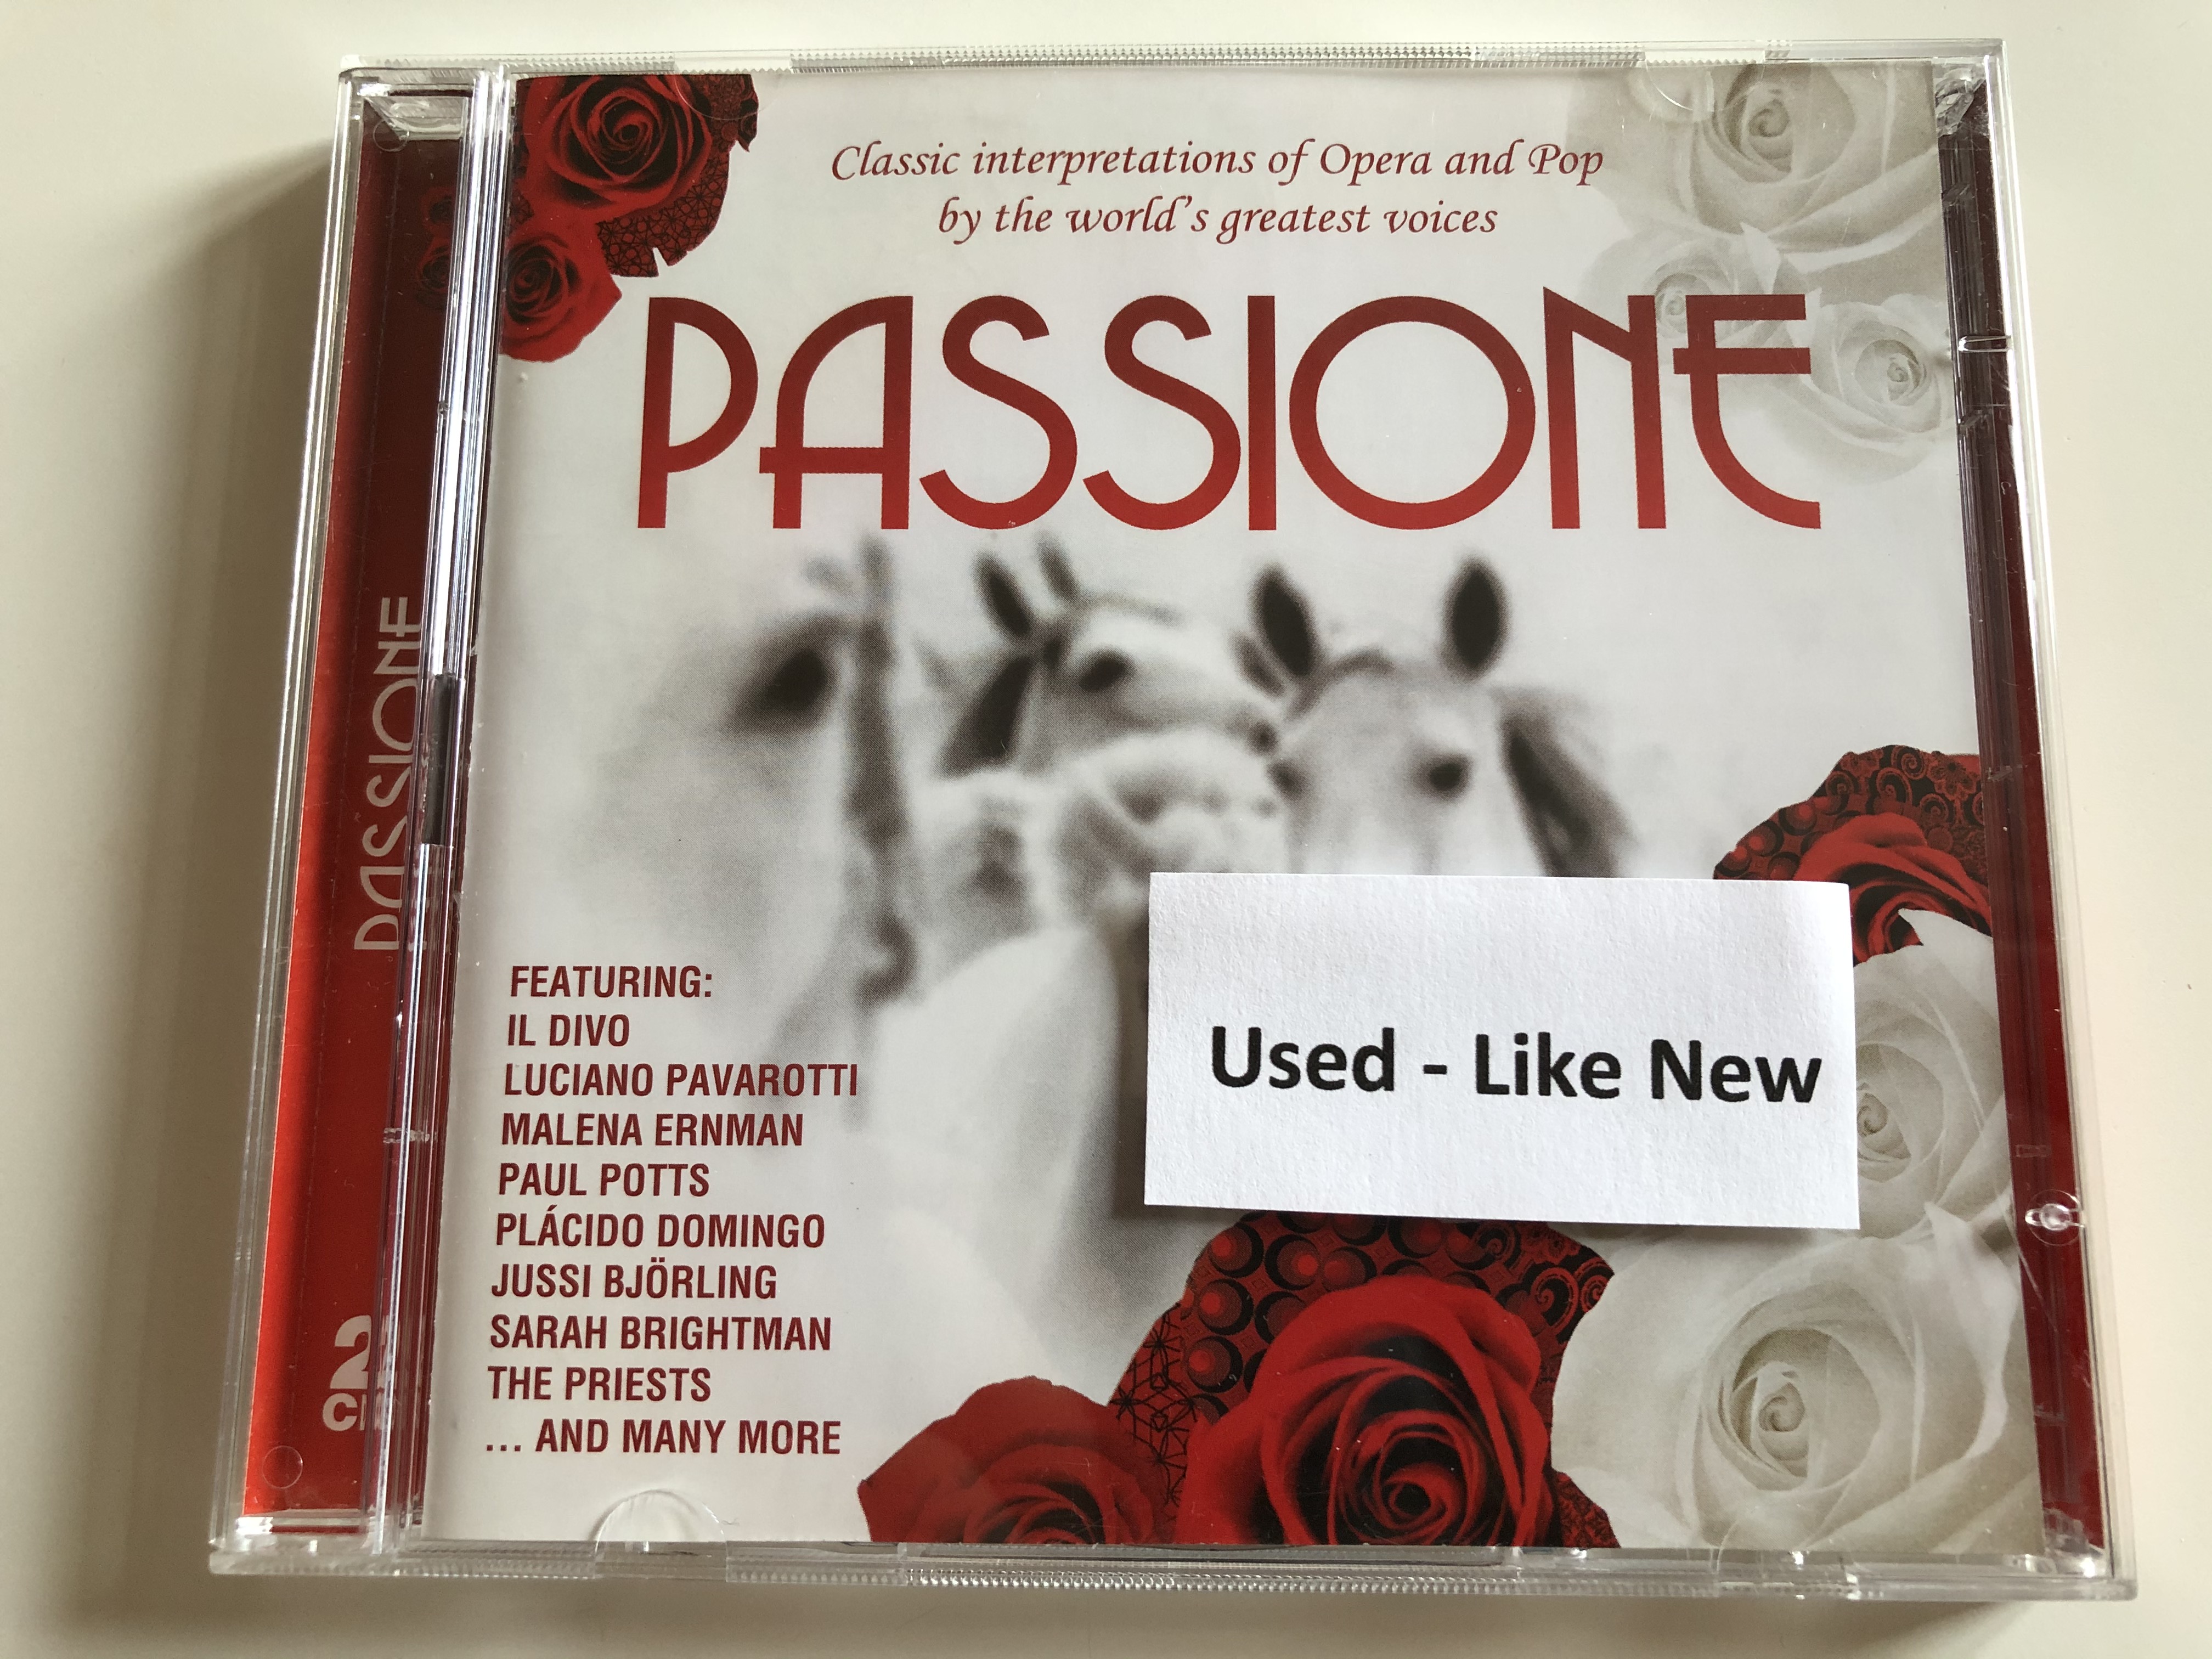 classic-interpreations-of-opera-and-pop-by-the-world-s-greatest-voices-passione-featuring-il-divo-luciano-pavarotti-malena-ernman-paul-potts-placido-domingo-jussi-bjorling-sarah-brightma-8-.jpg